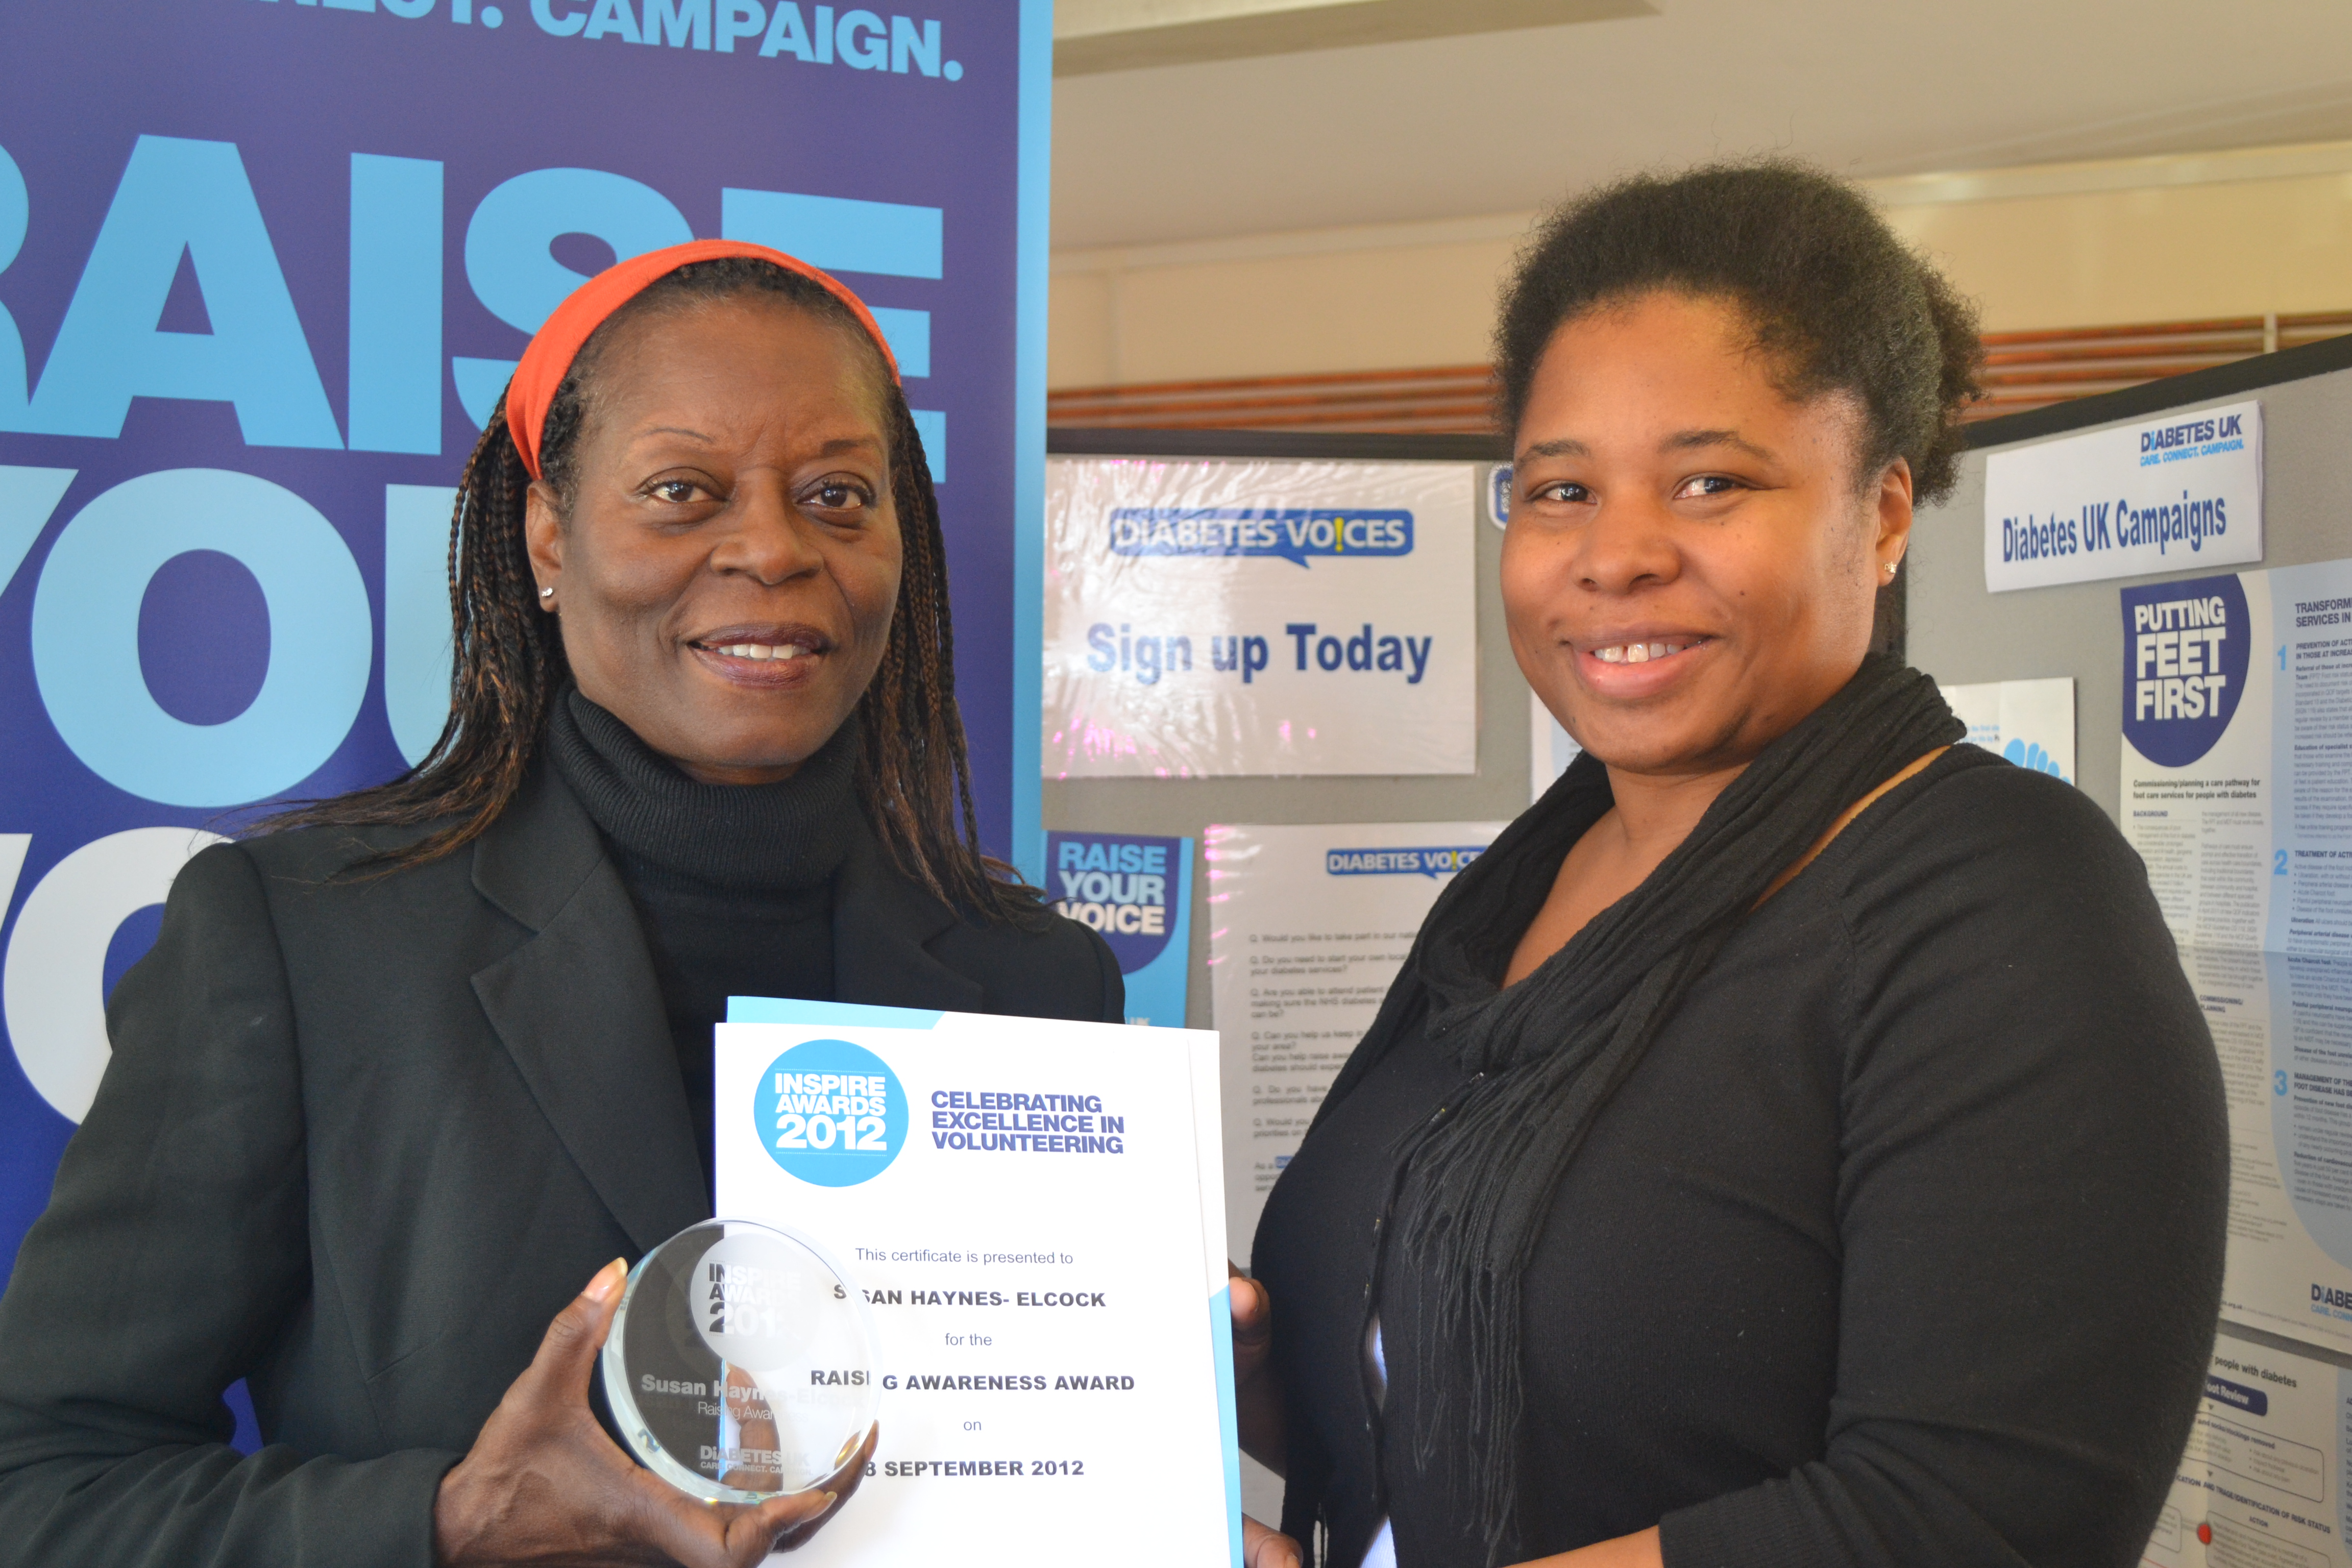 Attached is a photo of Susan on the LHS, receiving a Diabetes UK Inspire award at the end of the last year from Janet Alexander-Hall (on the RHS) who is Volunteer Development Officer for Diabetes UK in the Midlands.